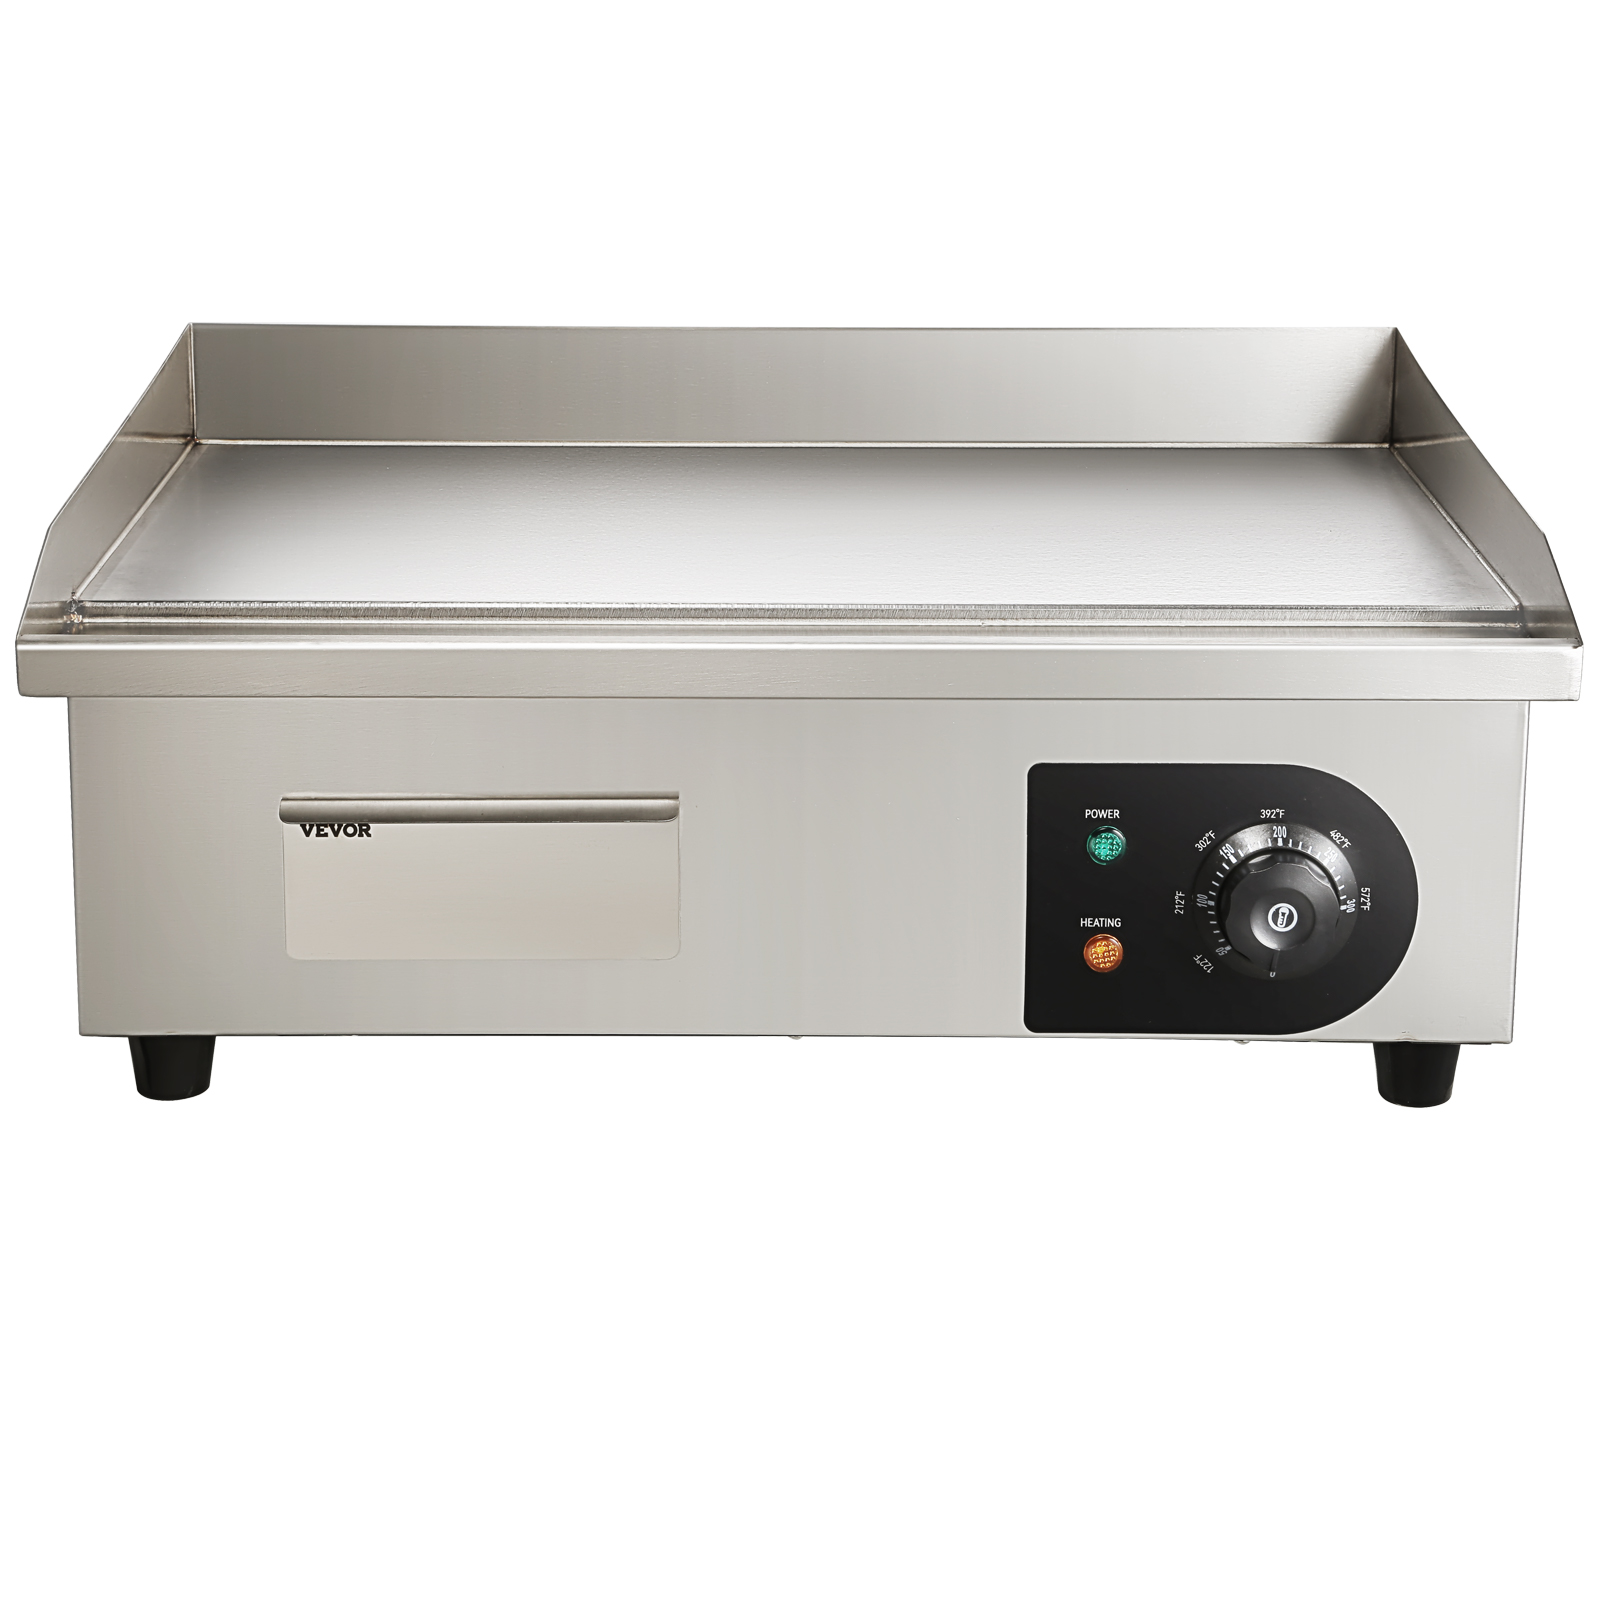 110V 3000W 22" Commercial Electric Countertop Griddle Stainless Steel BBQ Flat Top Grill Hot Plate, Adjustable Thermostatic Control 122°F-572°F, Sta - 1